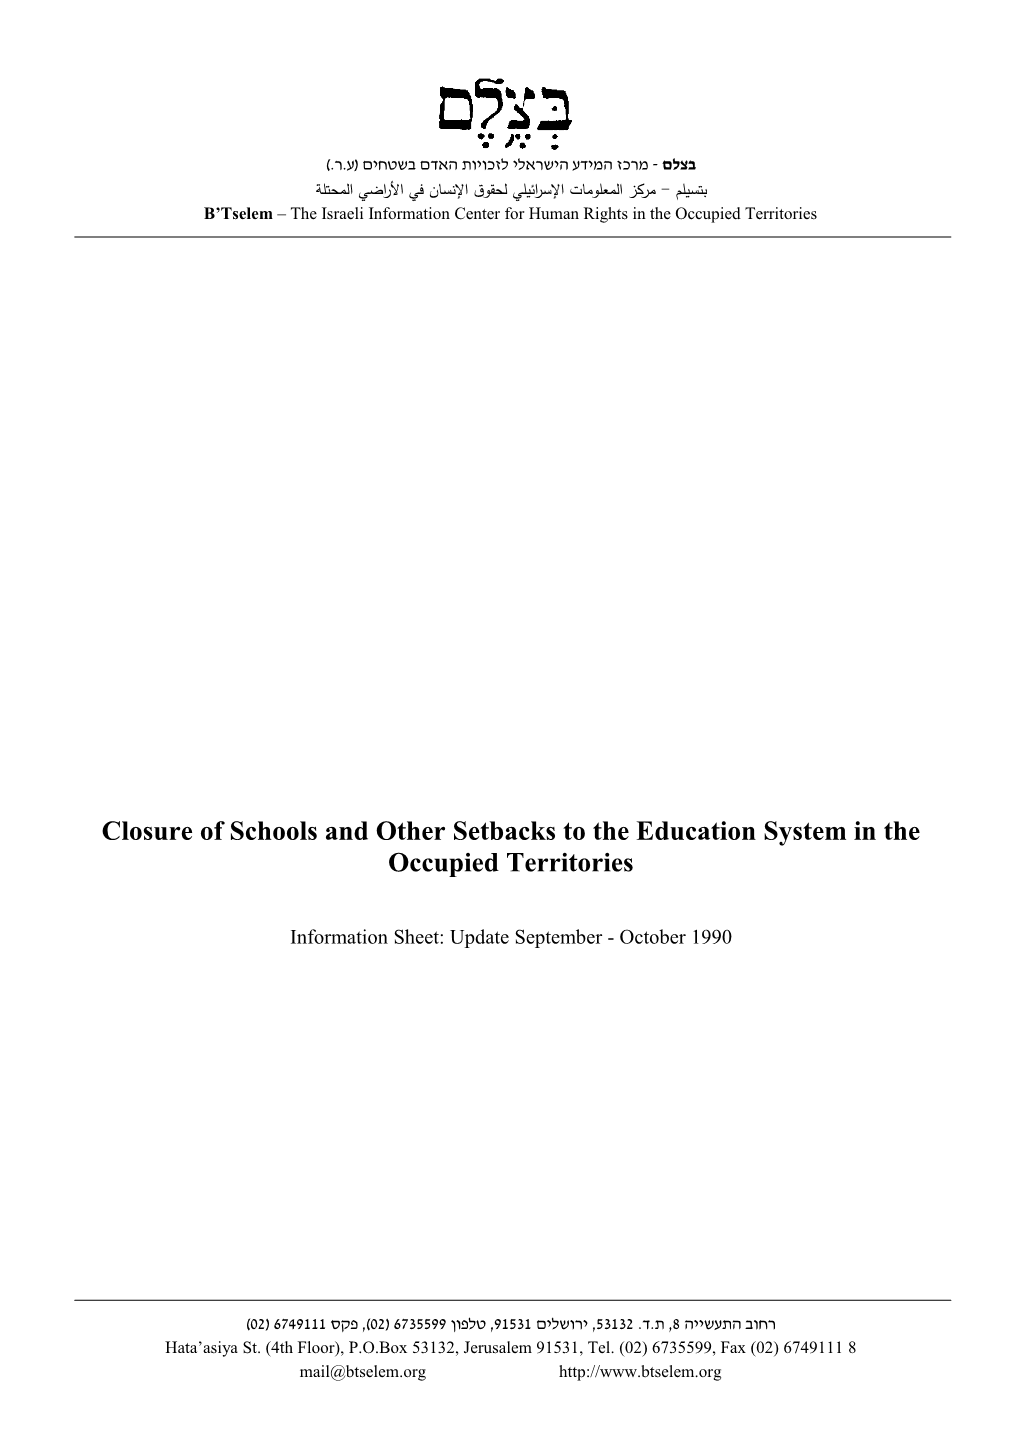 B'tselem Report: Closure of Schools and Other Setbacks to the Education System in the Occupied